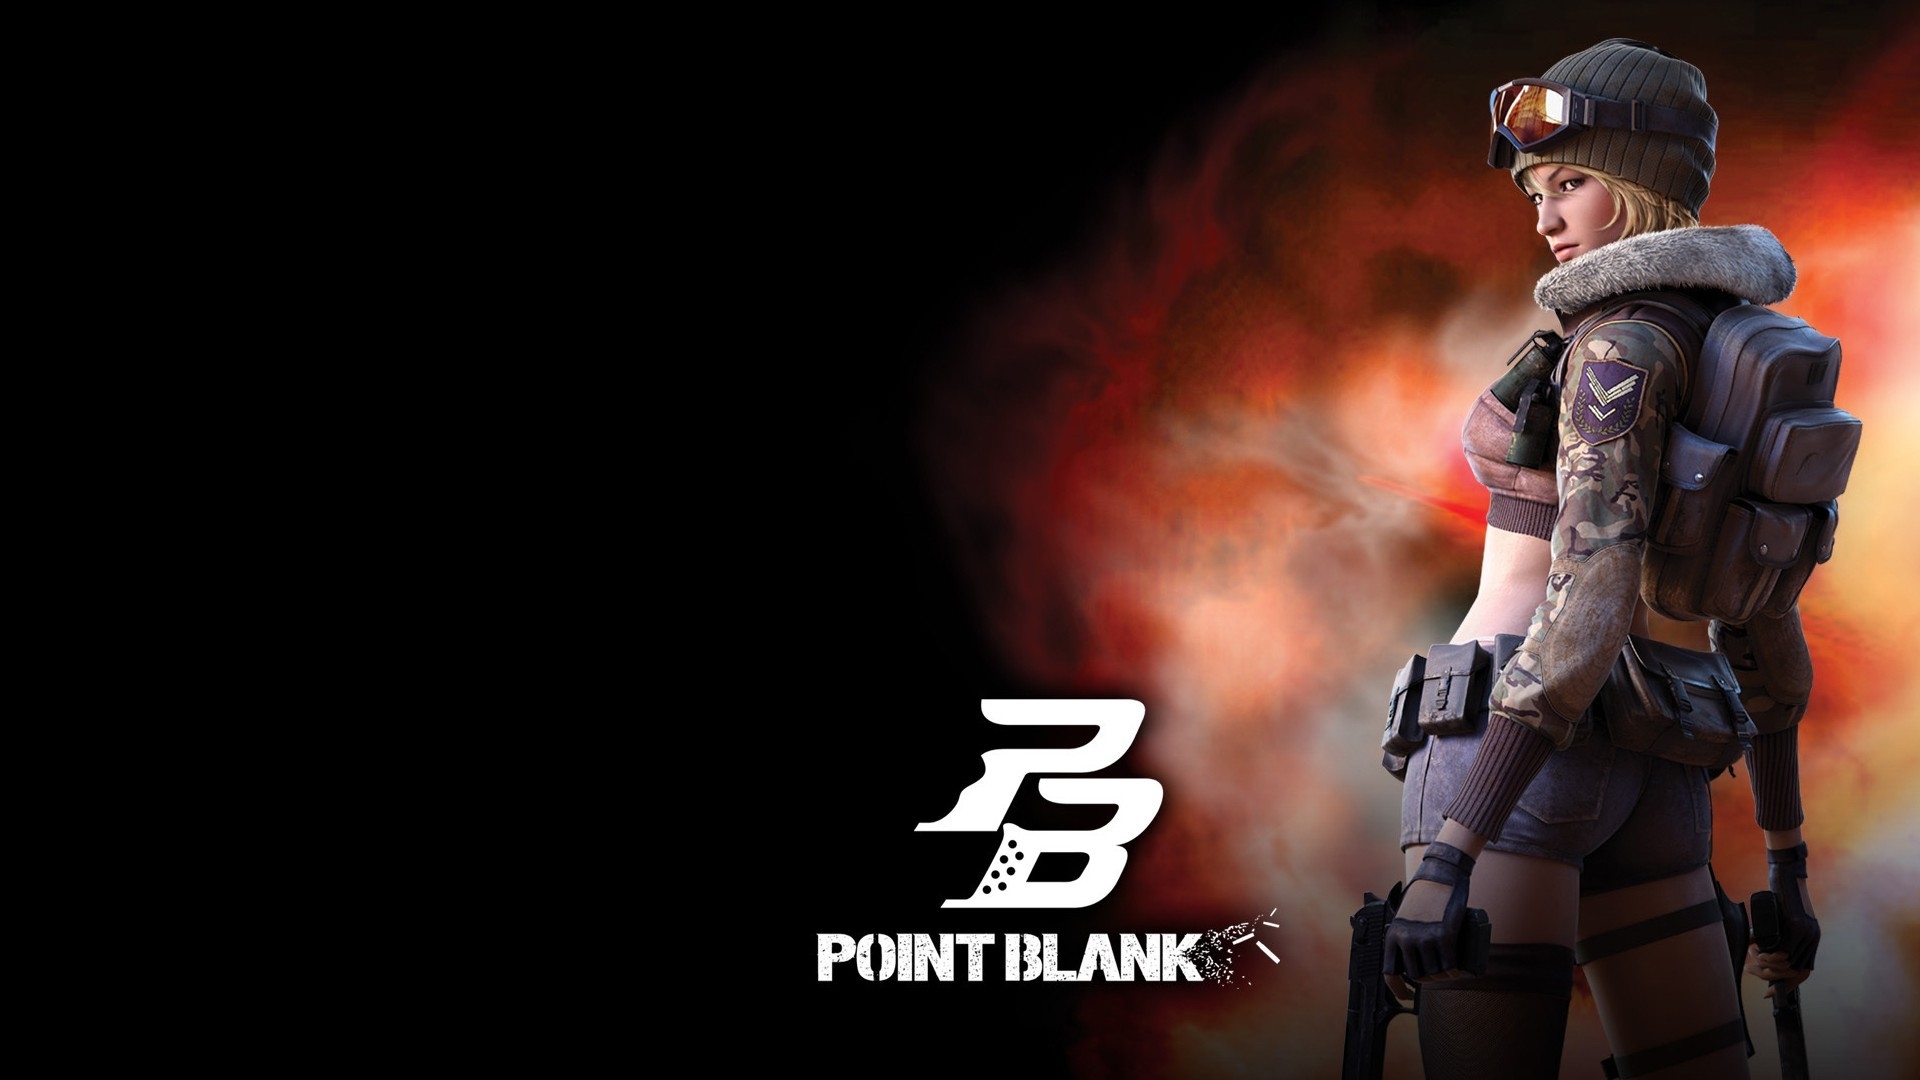 Point Blank Poster for 1920 x 1080 HDTV 1080p resolution